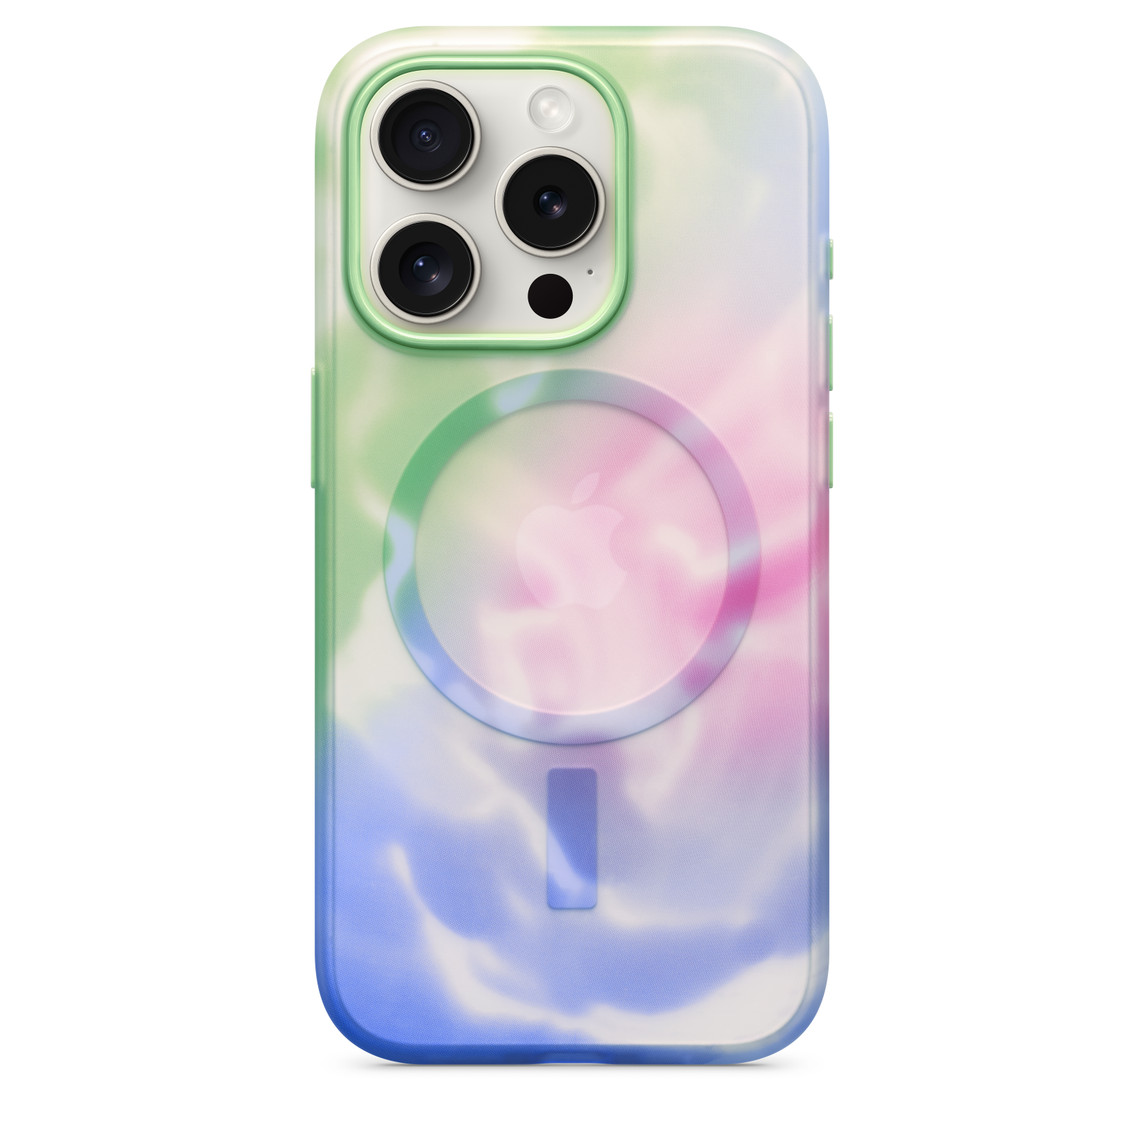 Designed to interact with the Apple MagSafe ecosystem, the OtterBox Figura Series case wraps an iPhone 15 Pro in flexible soft-touch material and includes a cut-out for the back camera.